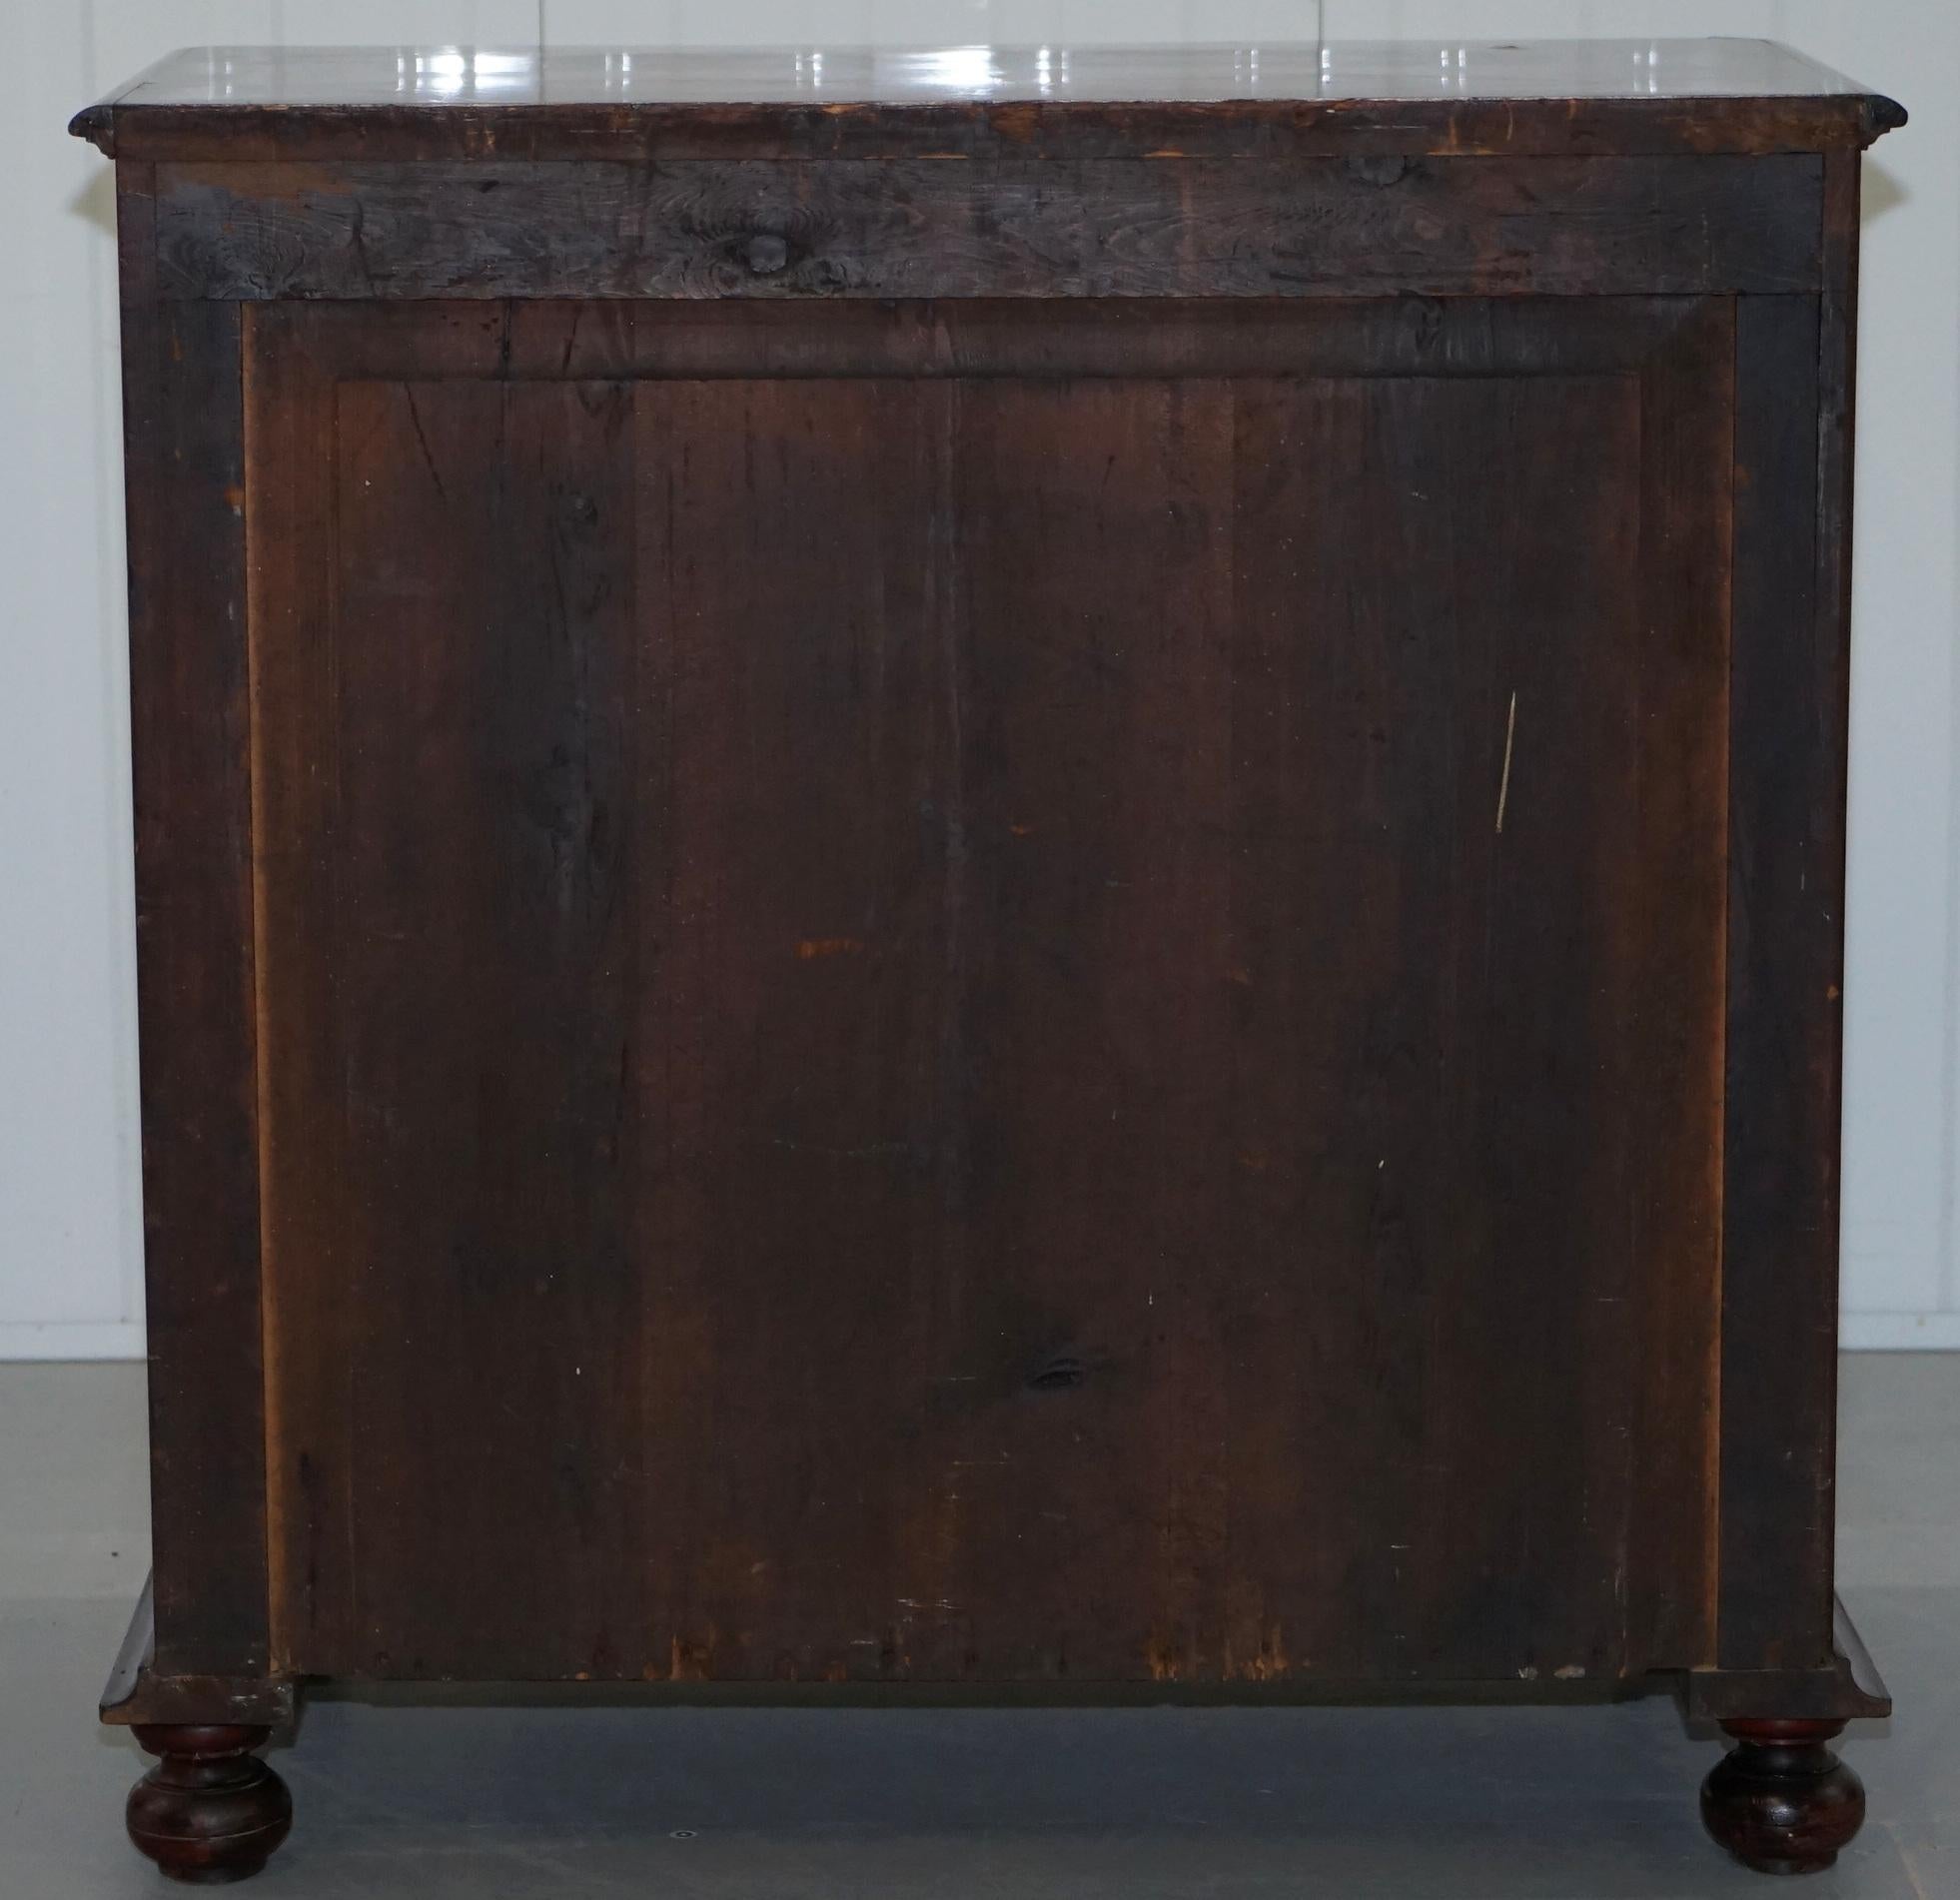 Stunning Biedermeier Flamed Mahogany Small Chest of Drawers Rare Find circa 1820 10